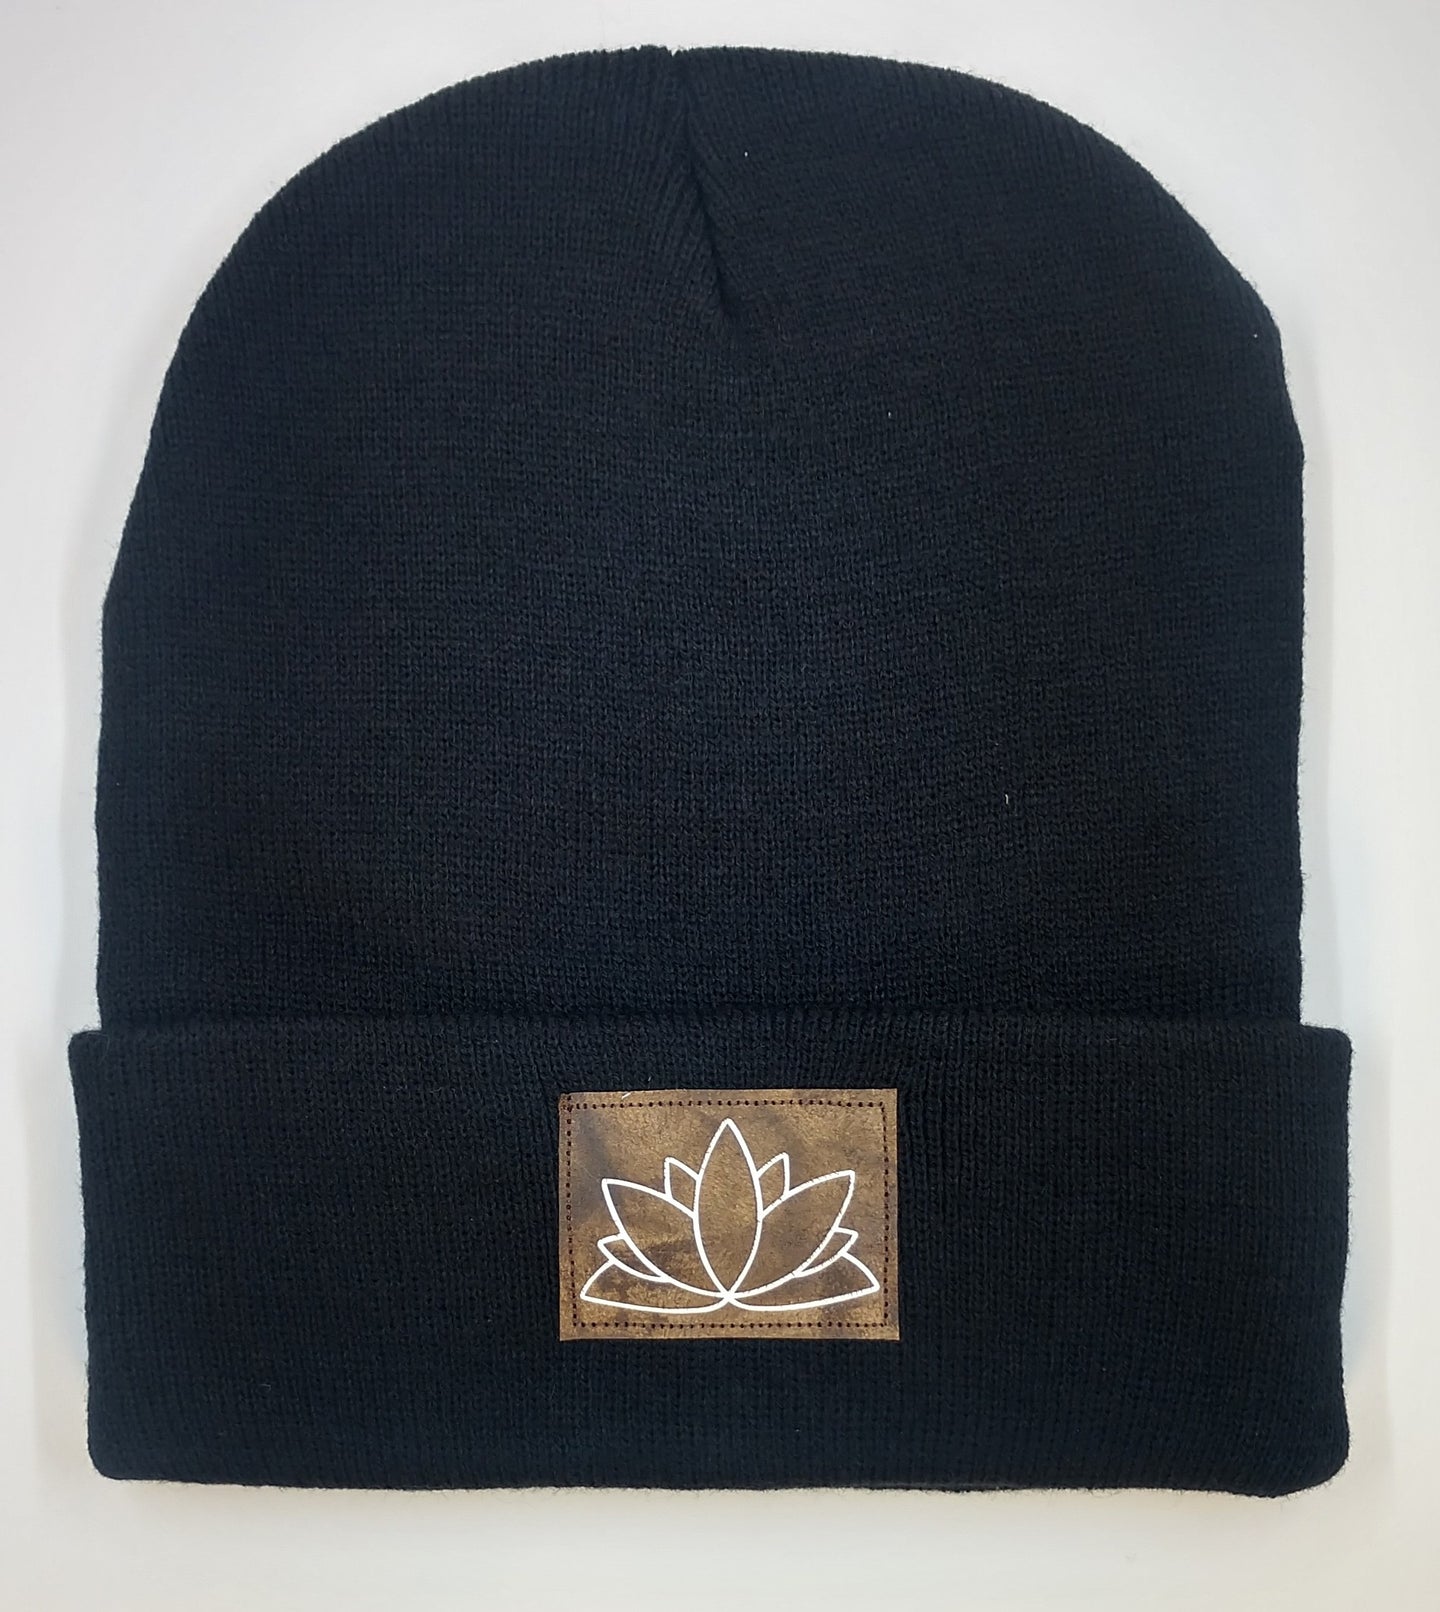 Beanie with the lotus symbol by buddha gear